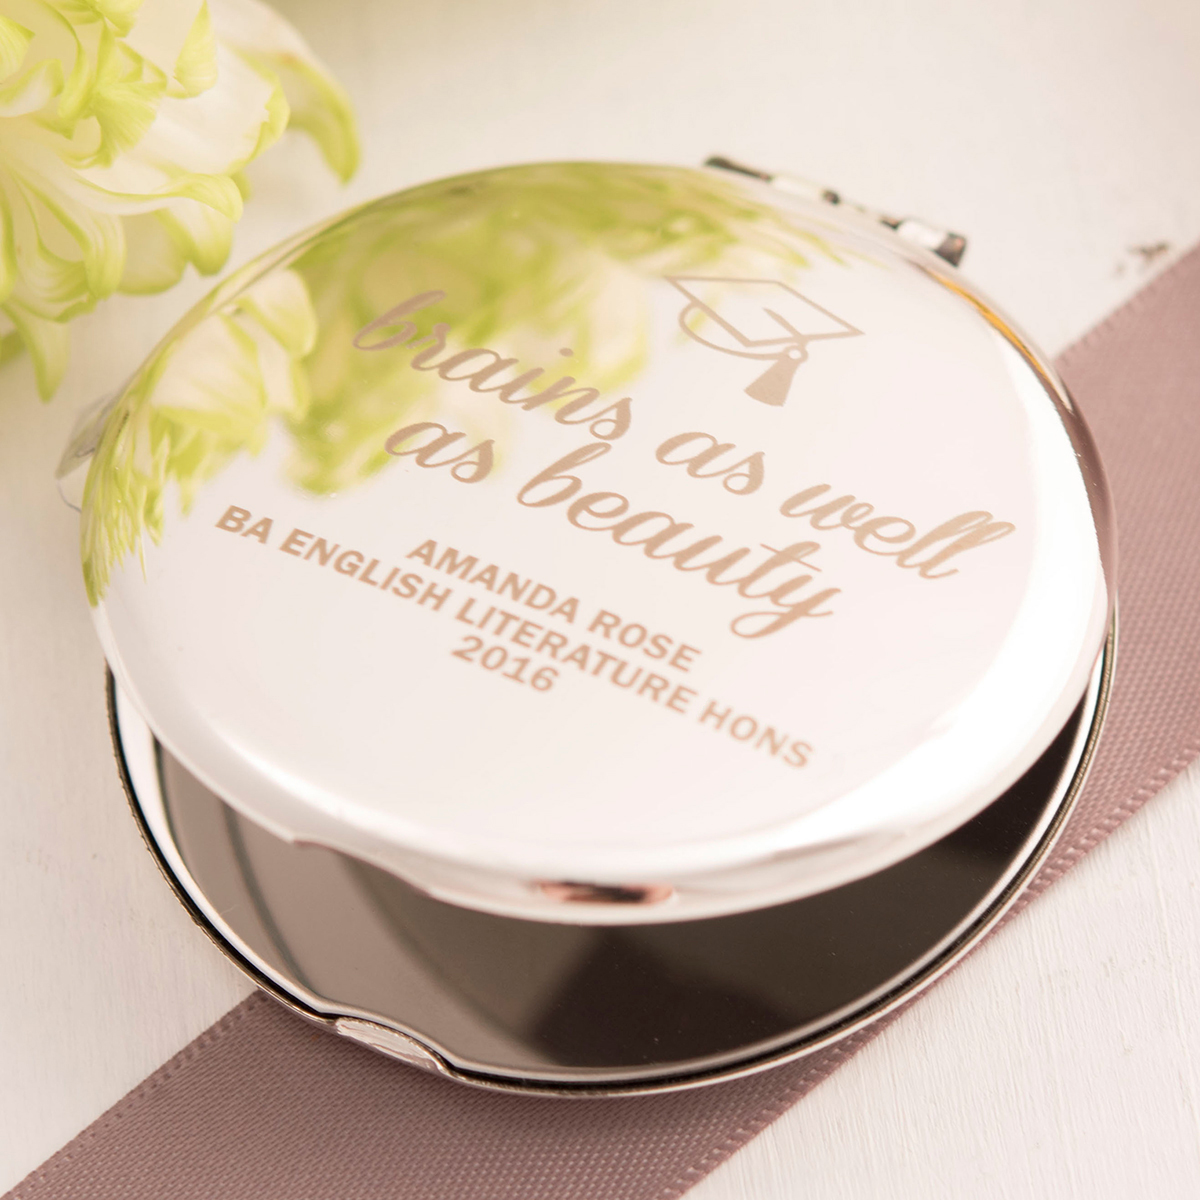 Engraved Silver Round Compact Mirror - Brains As Well As Beauty